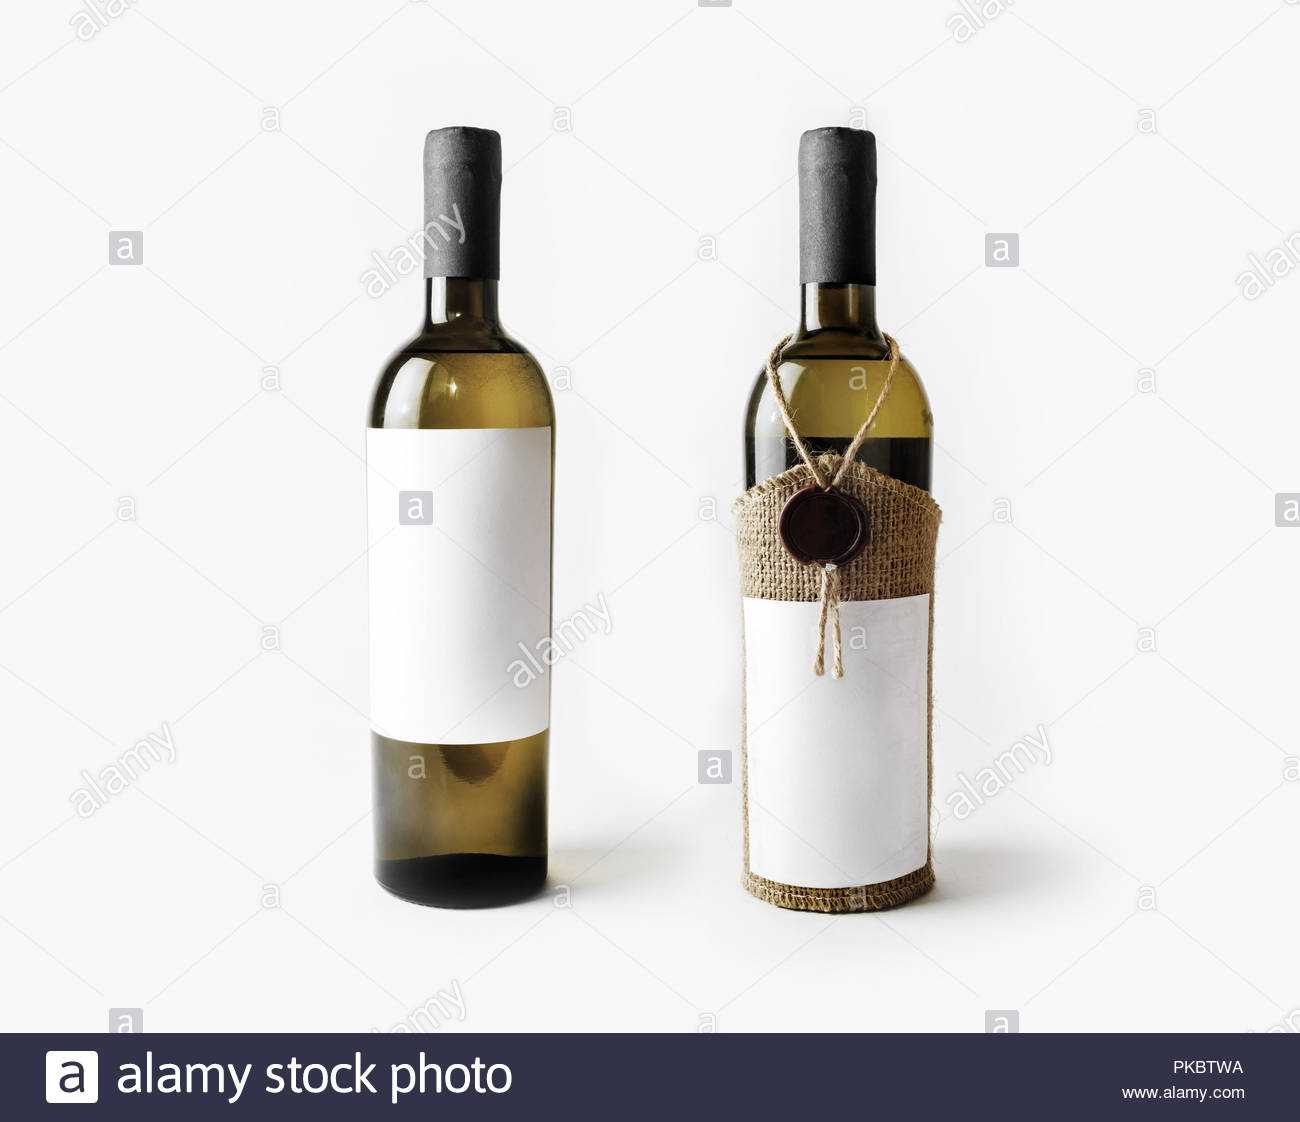 Two Wine Bottles With Blank Labels. Template For Placing Pertaining To Blank Wine Label Template